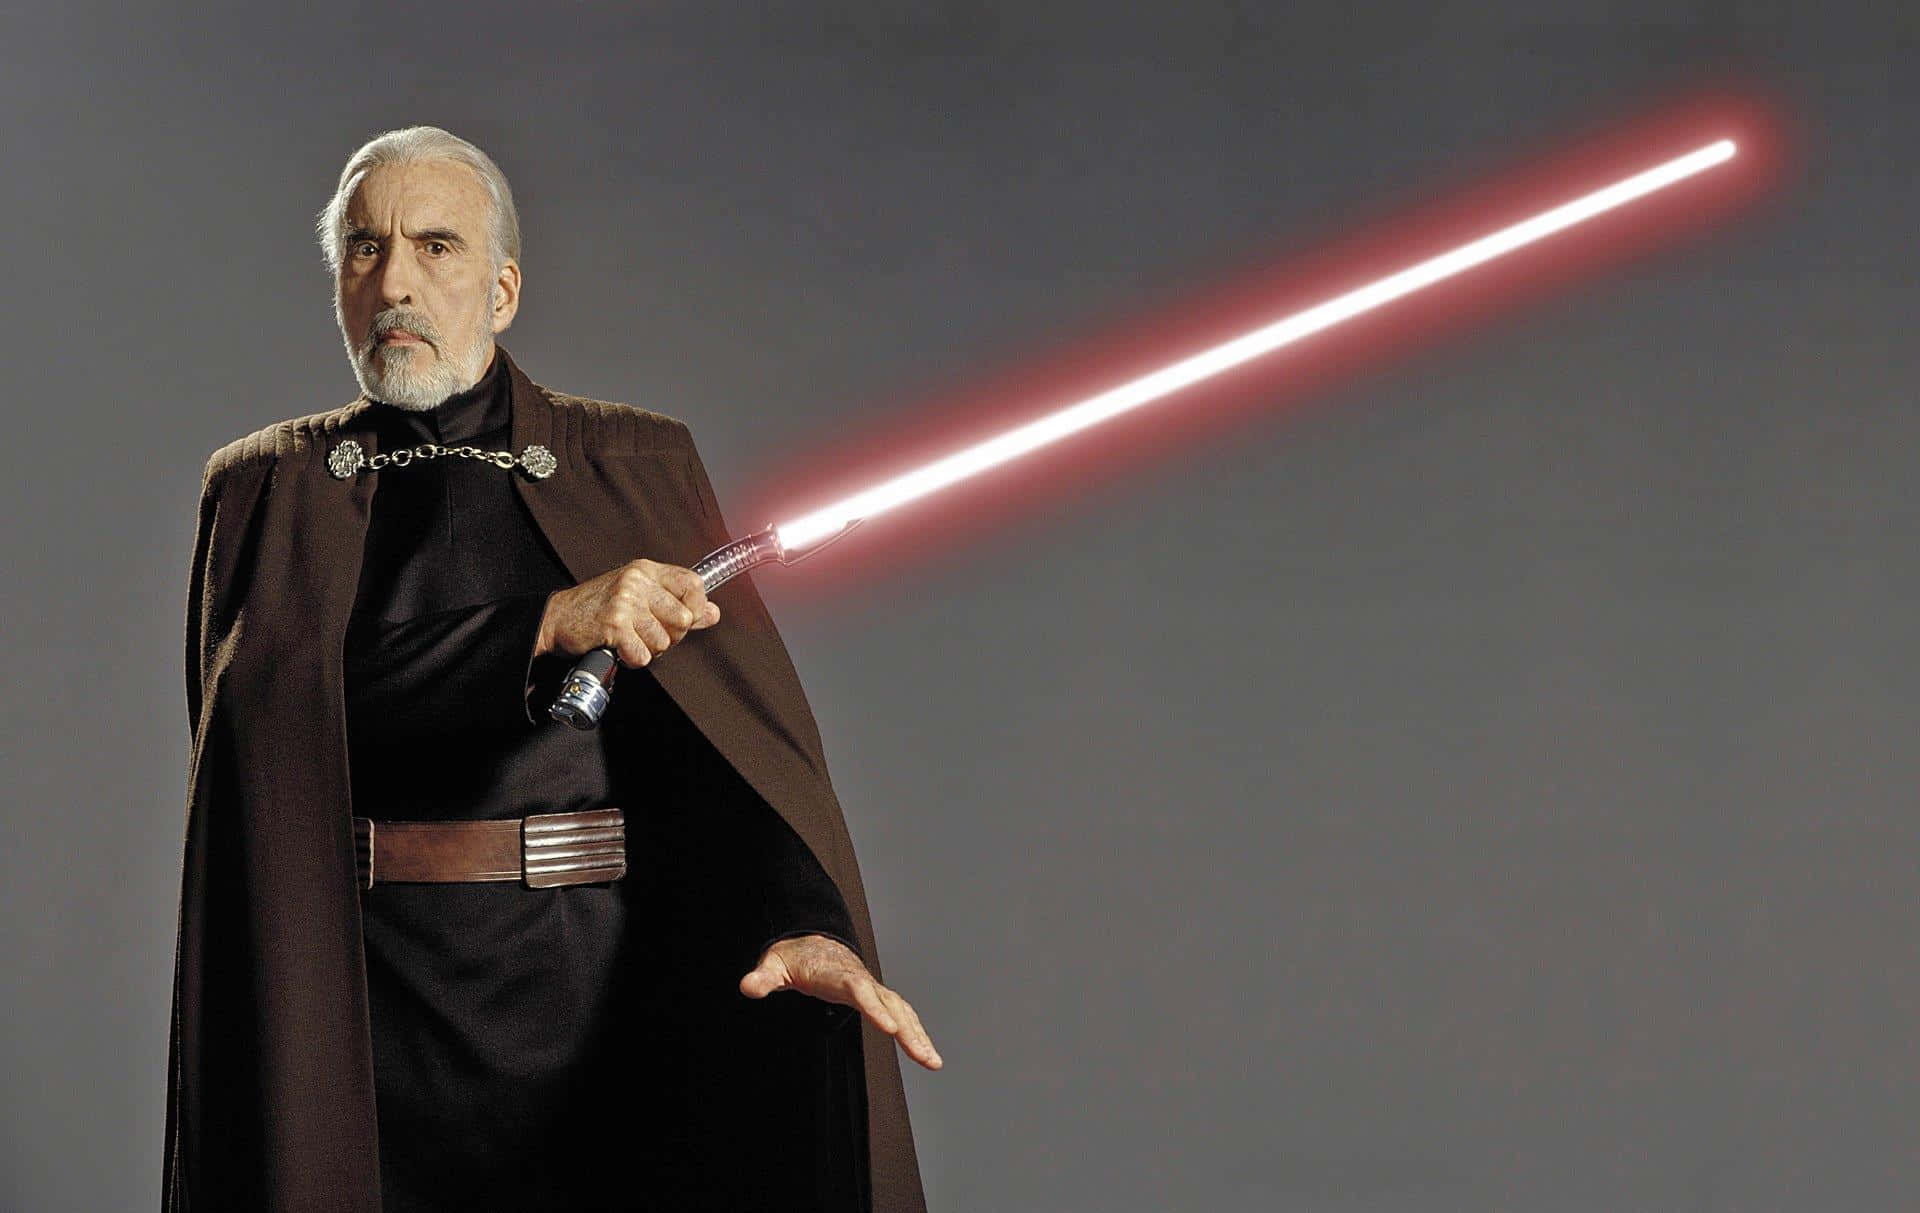 Masterful Count Dooku wielding his iconic lightsaber Wallpaper